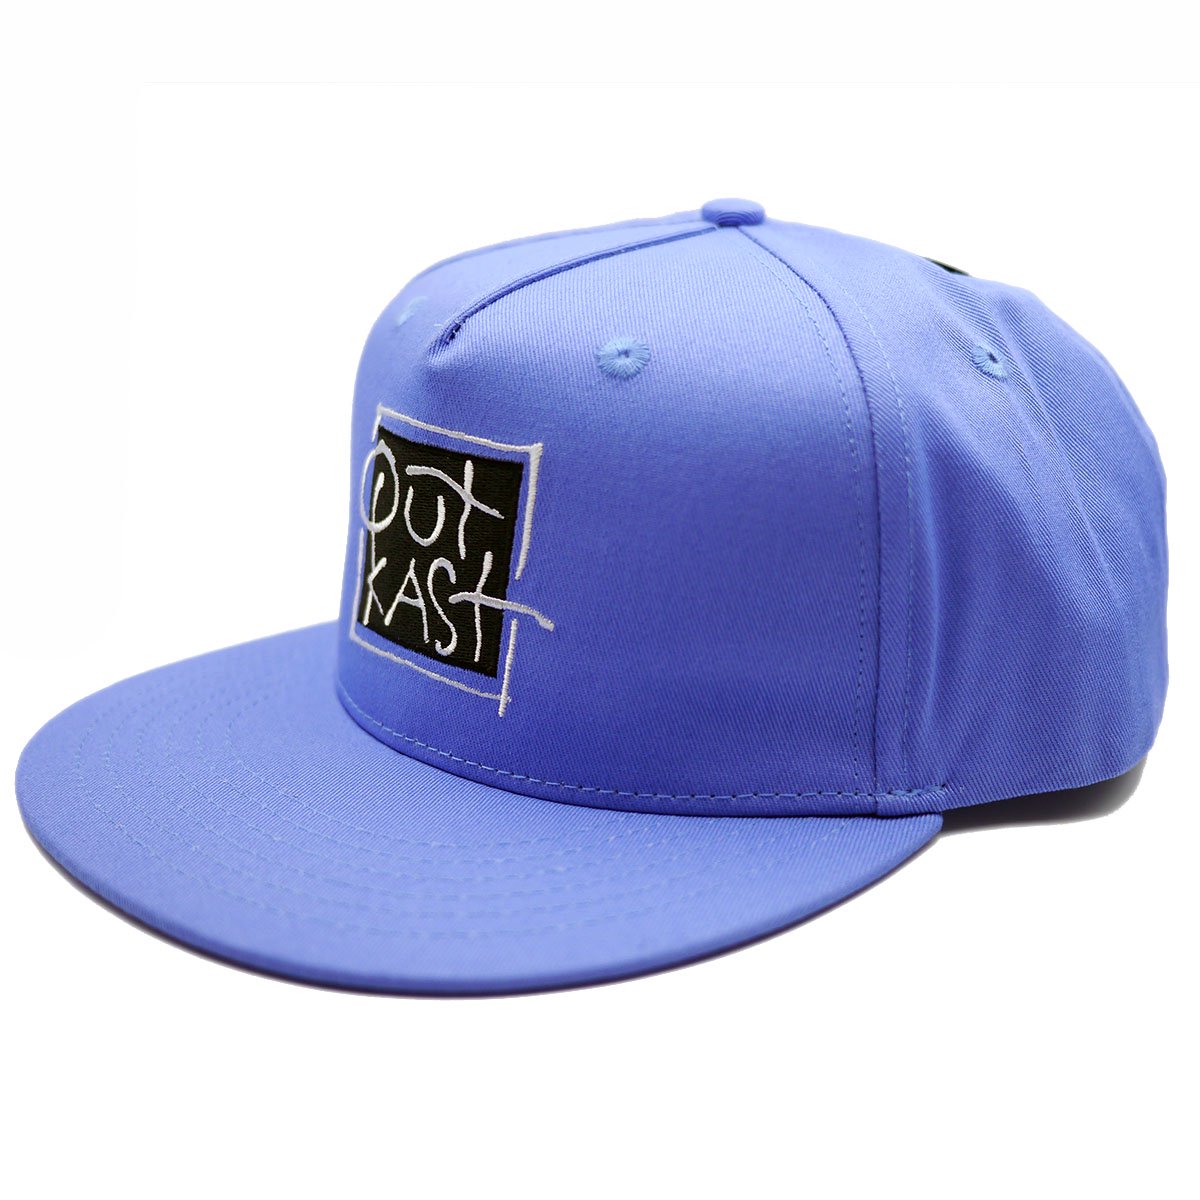 Fedup | HIPHOP WEAR | <img class='new_mark_img1' src='https://img.shop-pro.jp/img/new/icons30.gif' style='border:none;display:inline;margin:0px;padding:0px;width:auto;' />OUTKAST 